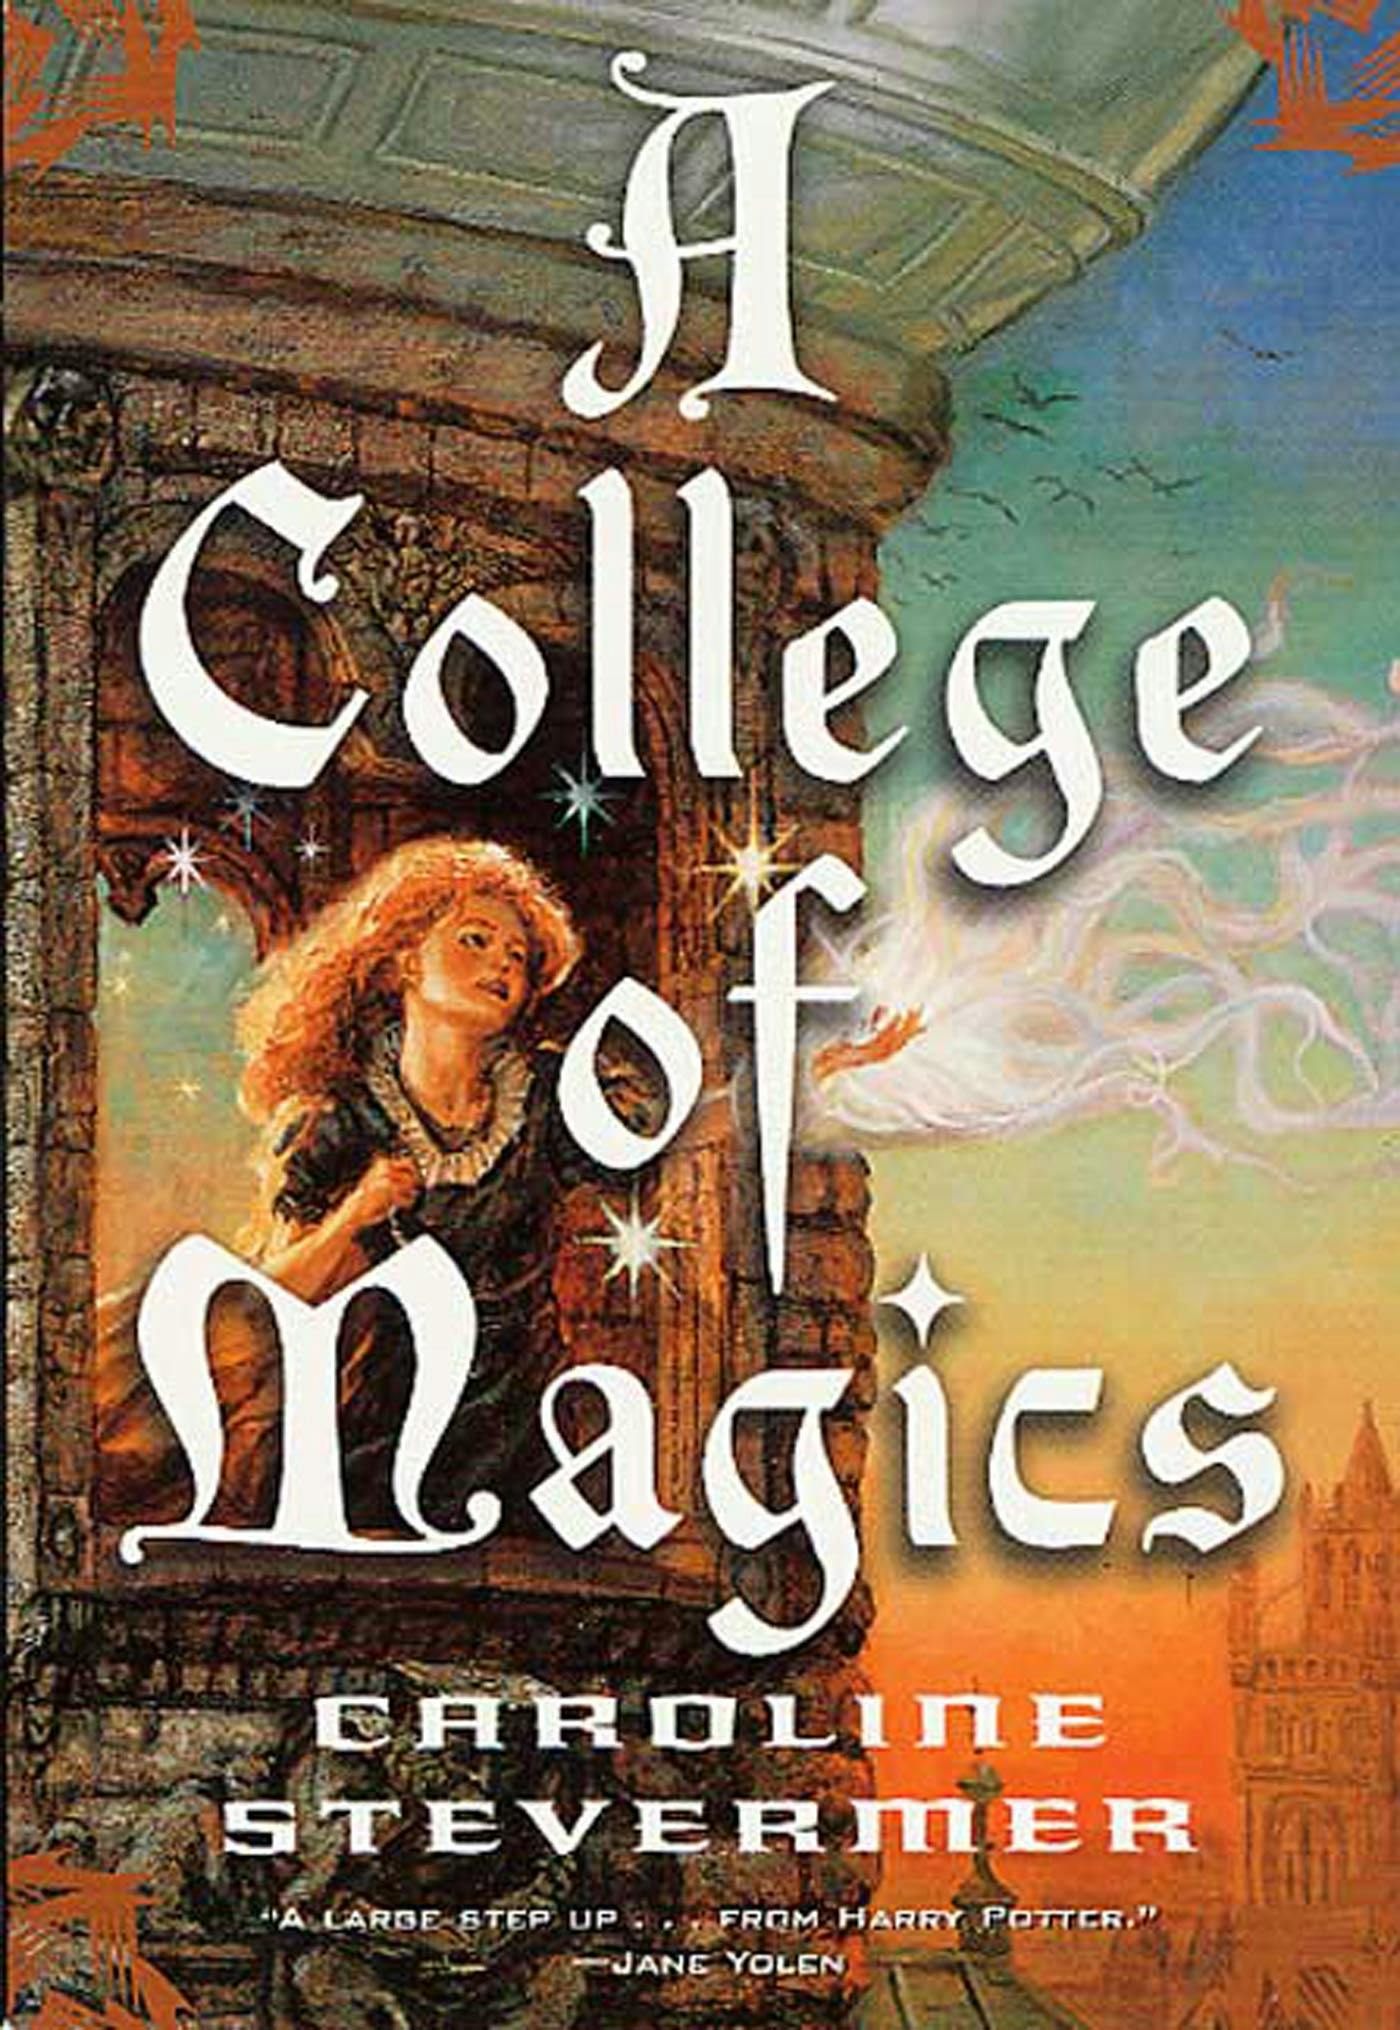 Cover for the book titled as: A College of Magics